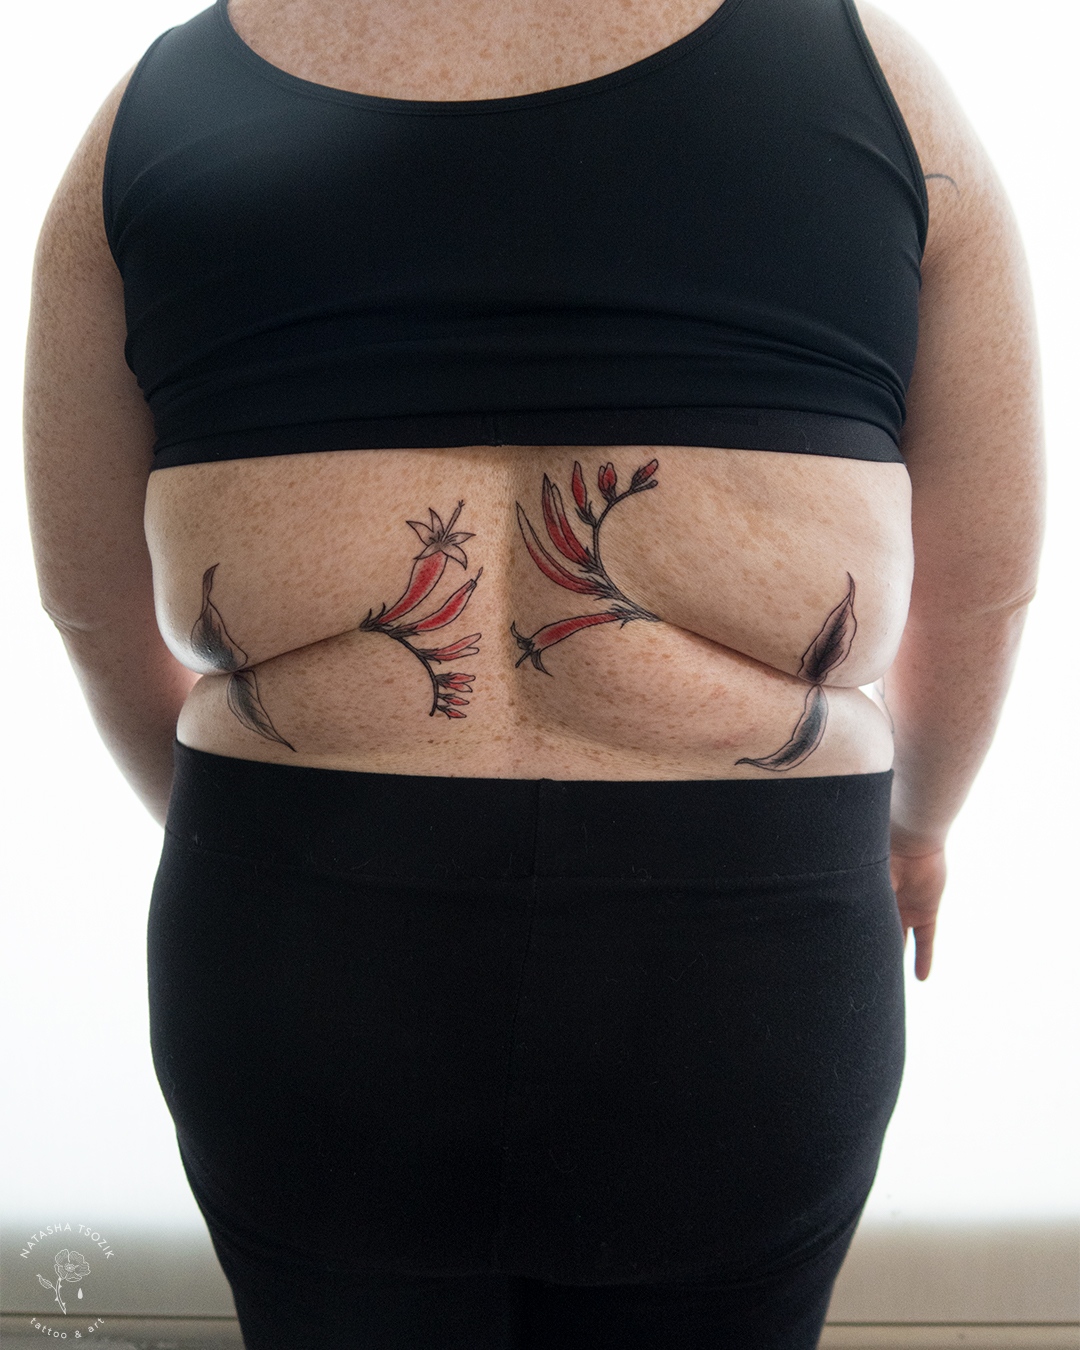 Expert Surgical Tattoo Removal | From £595 | UKSKIN